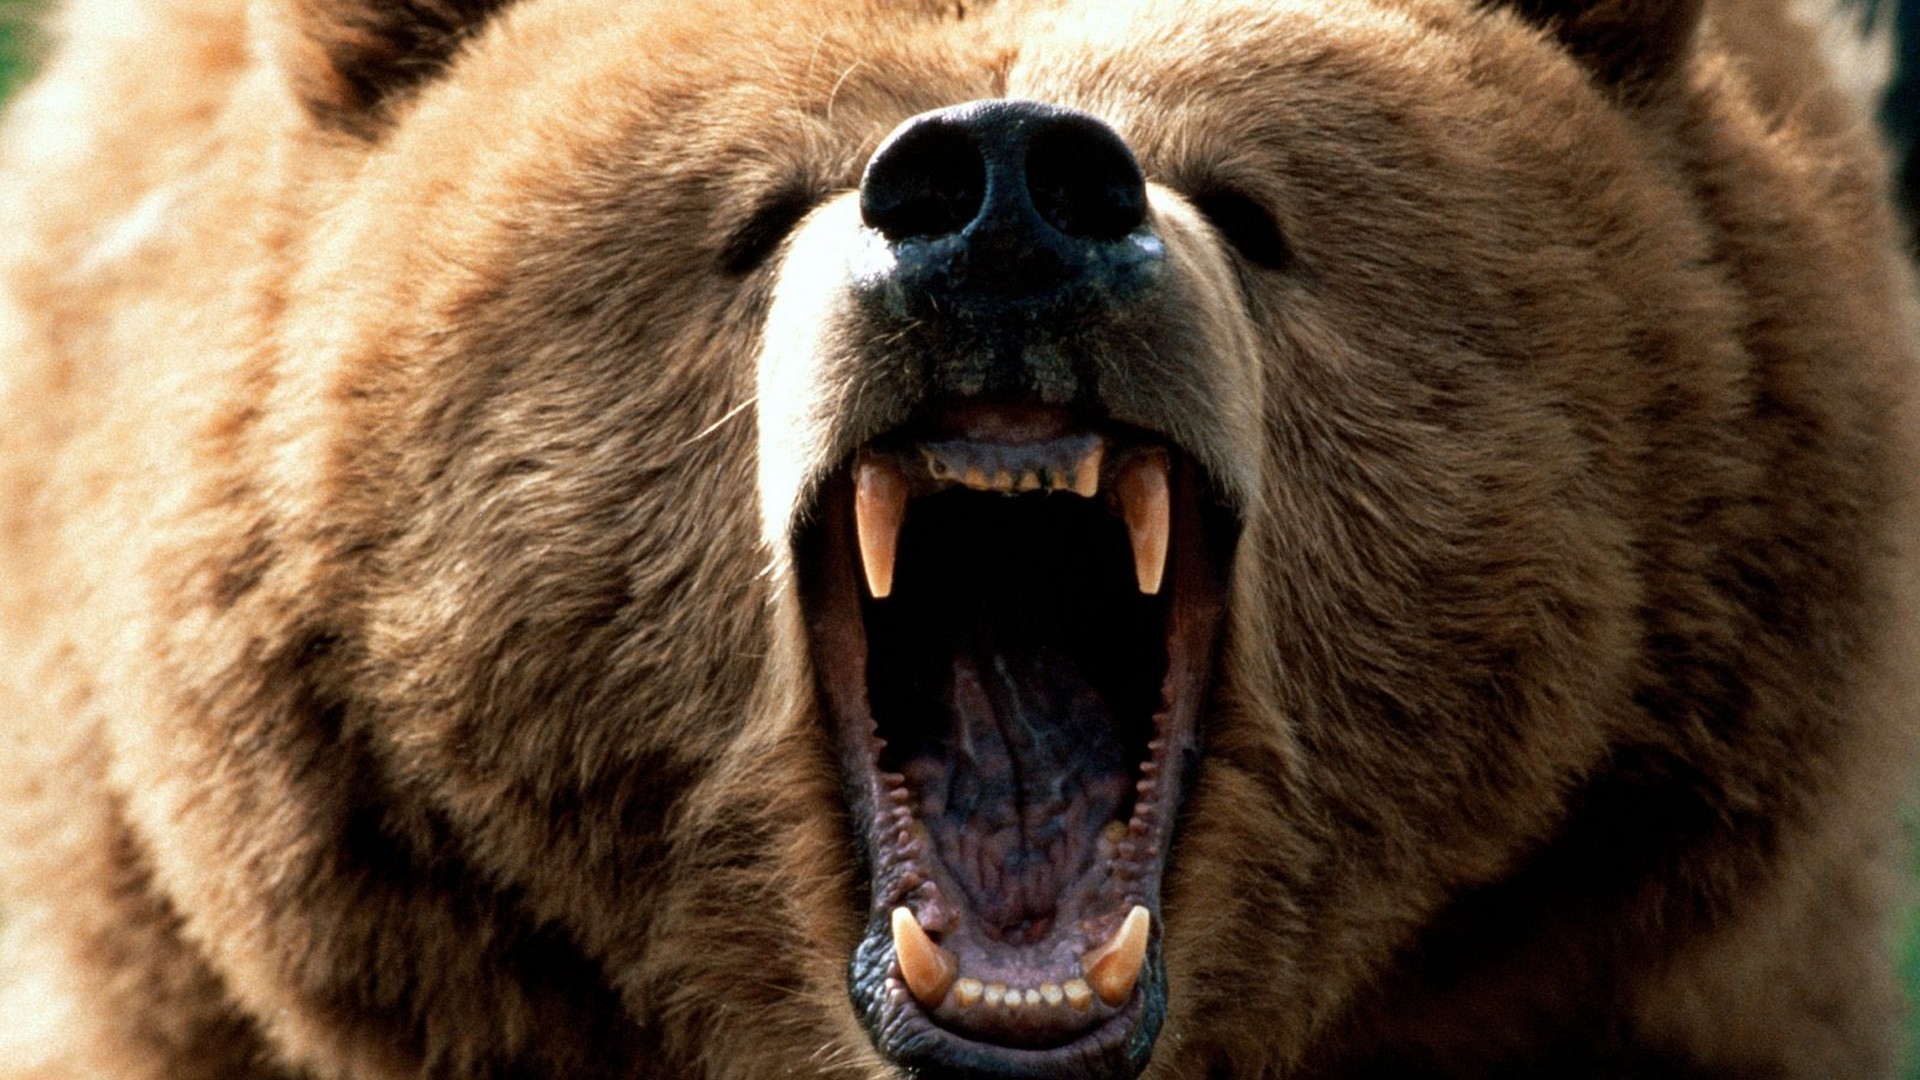 General 1920x1080 grizzly bear roar bears animals frontal view mammals